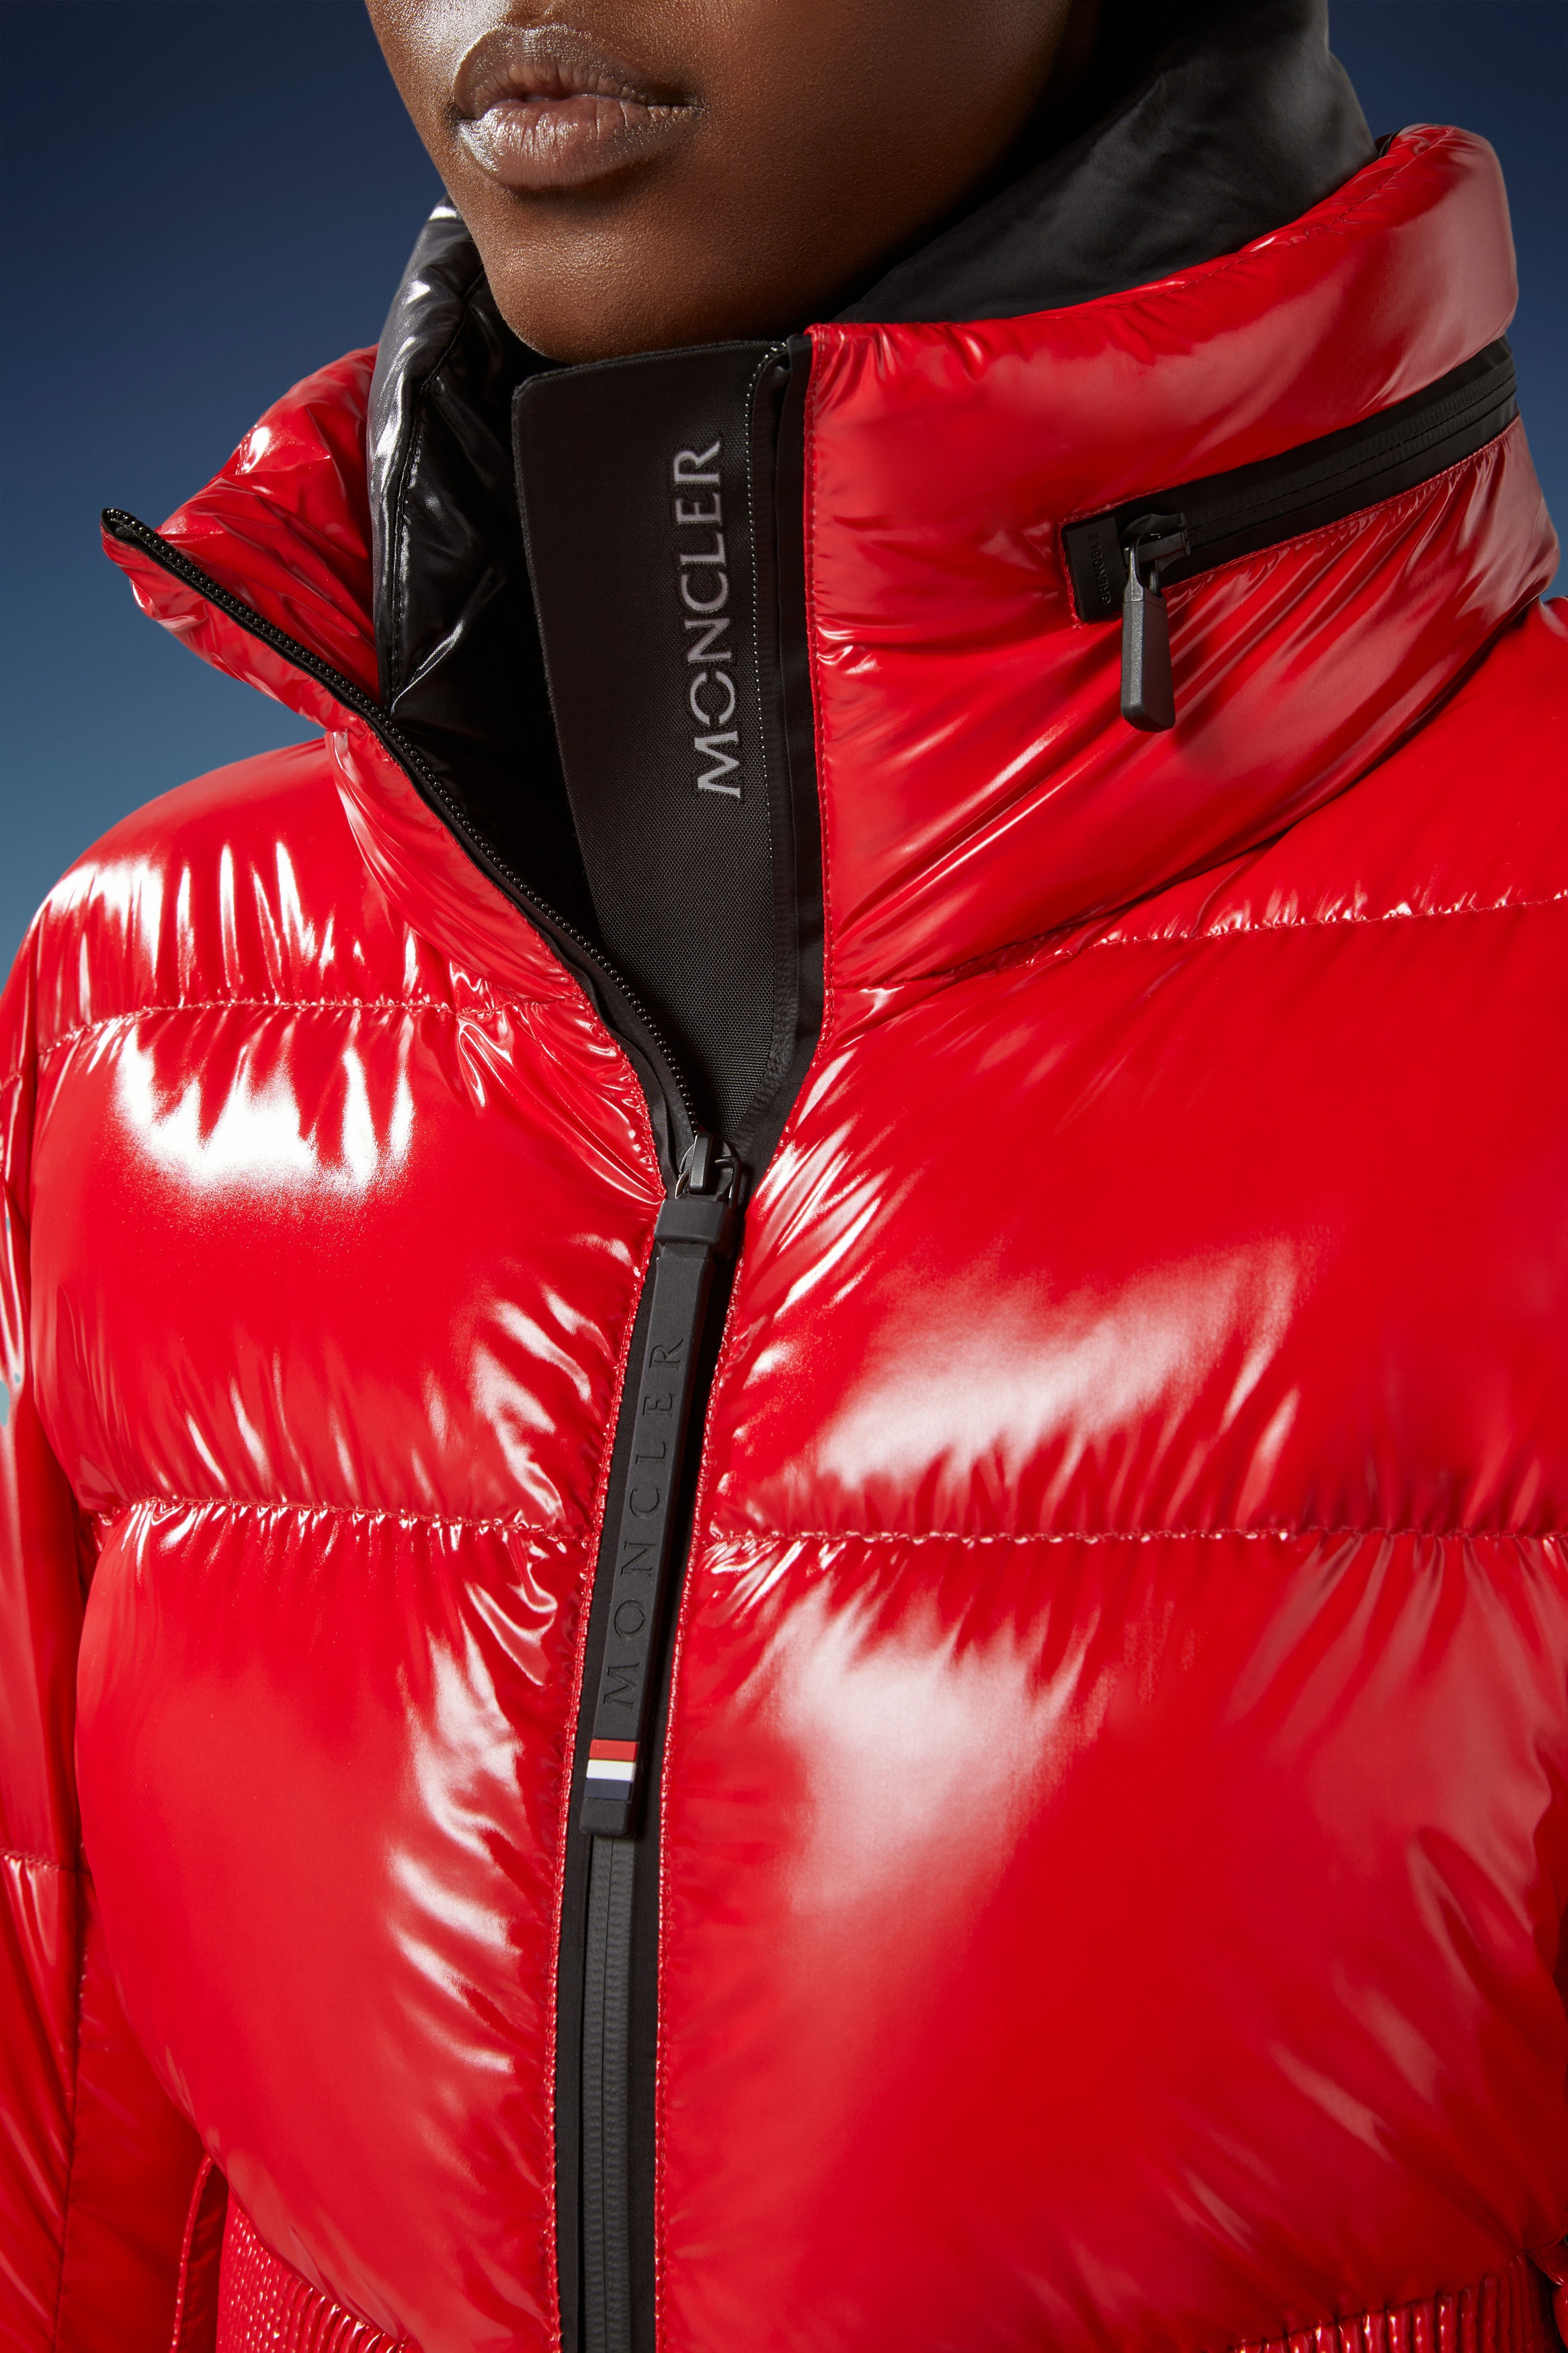 Moncler Grenoble Women's Vouvry Down Jacket - Red